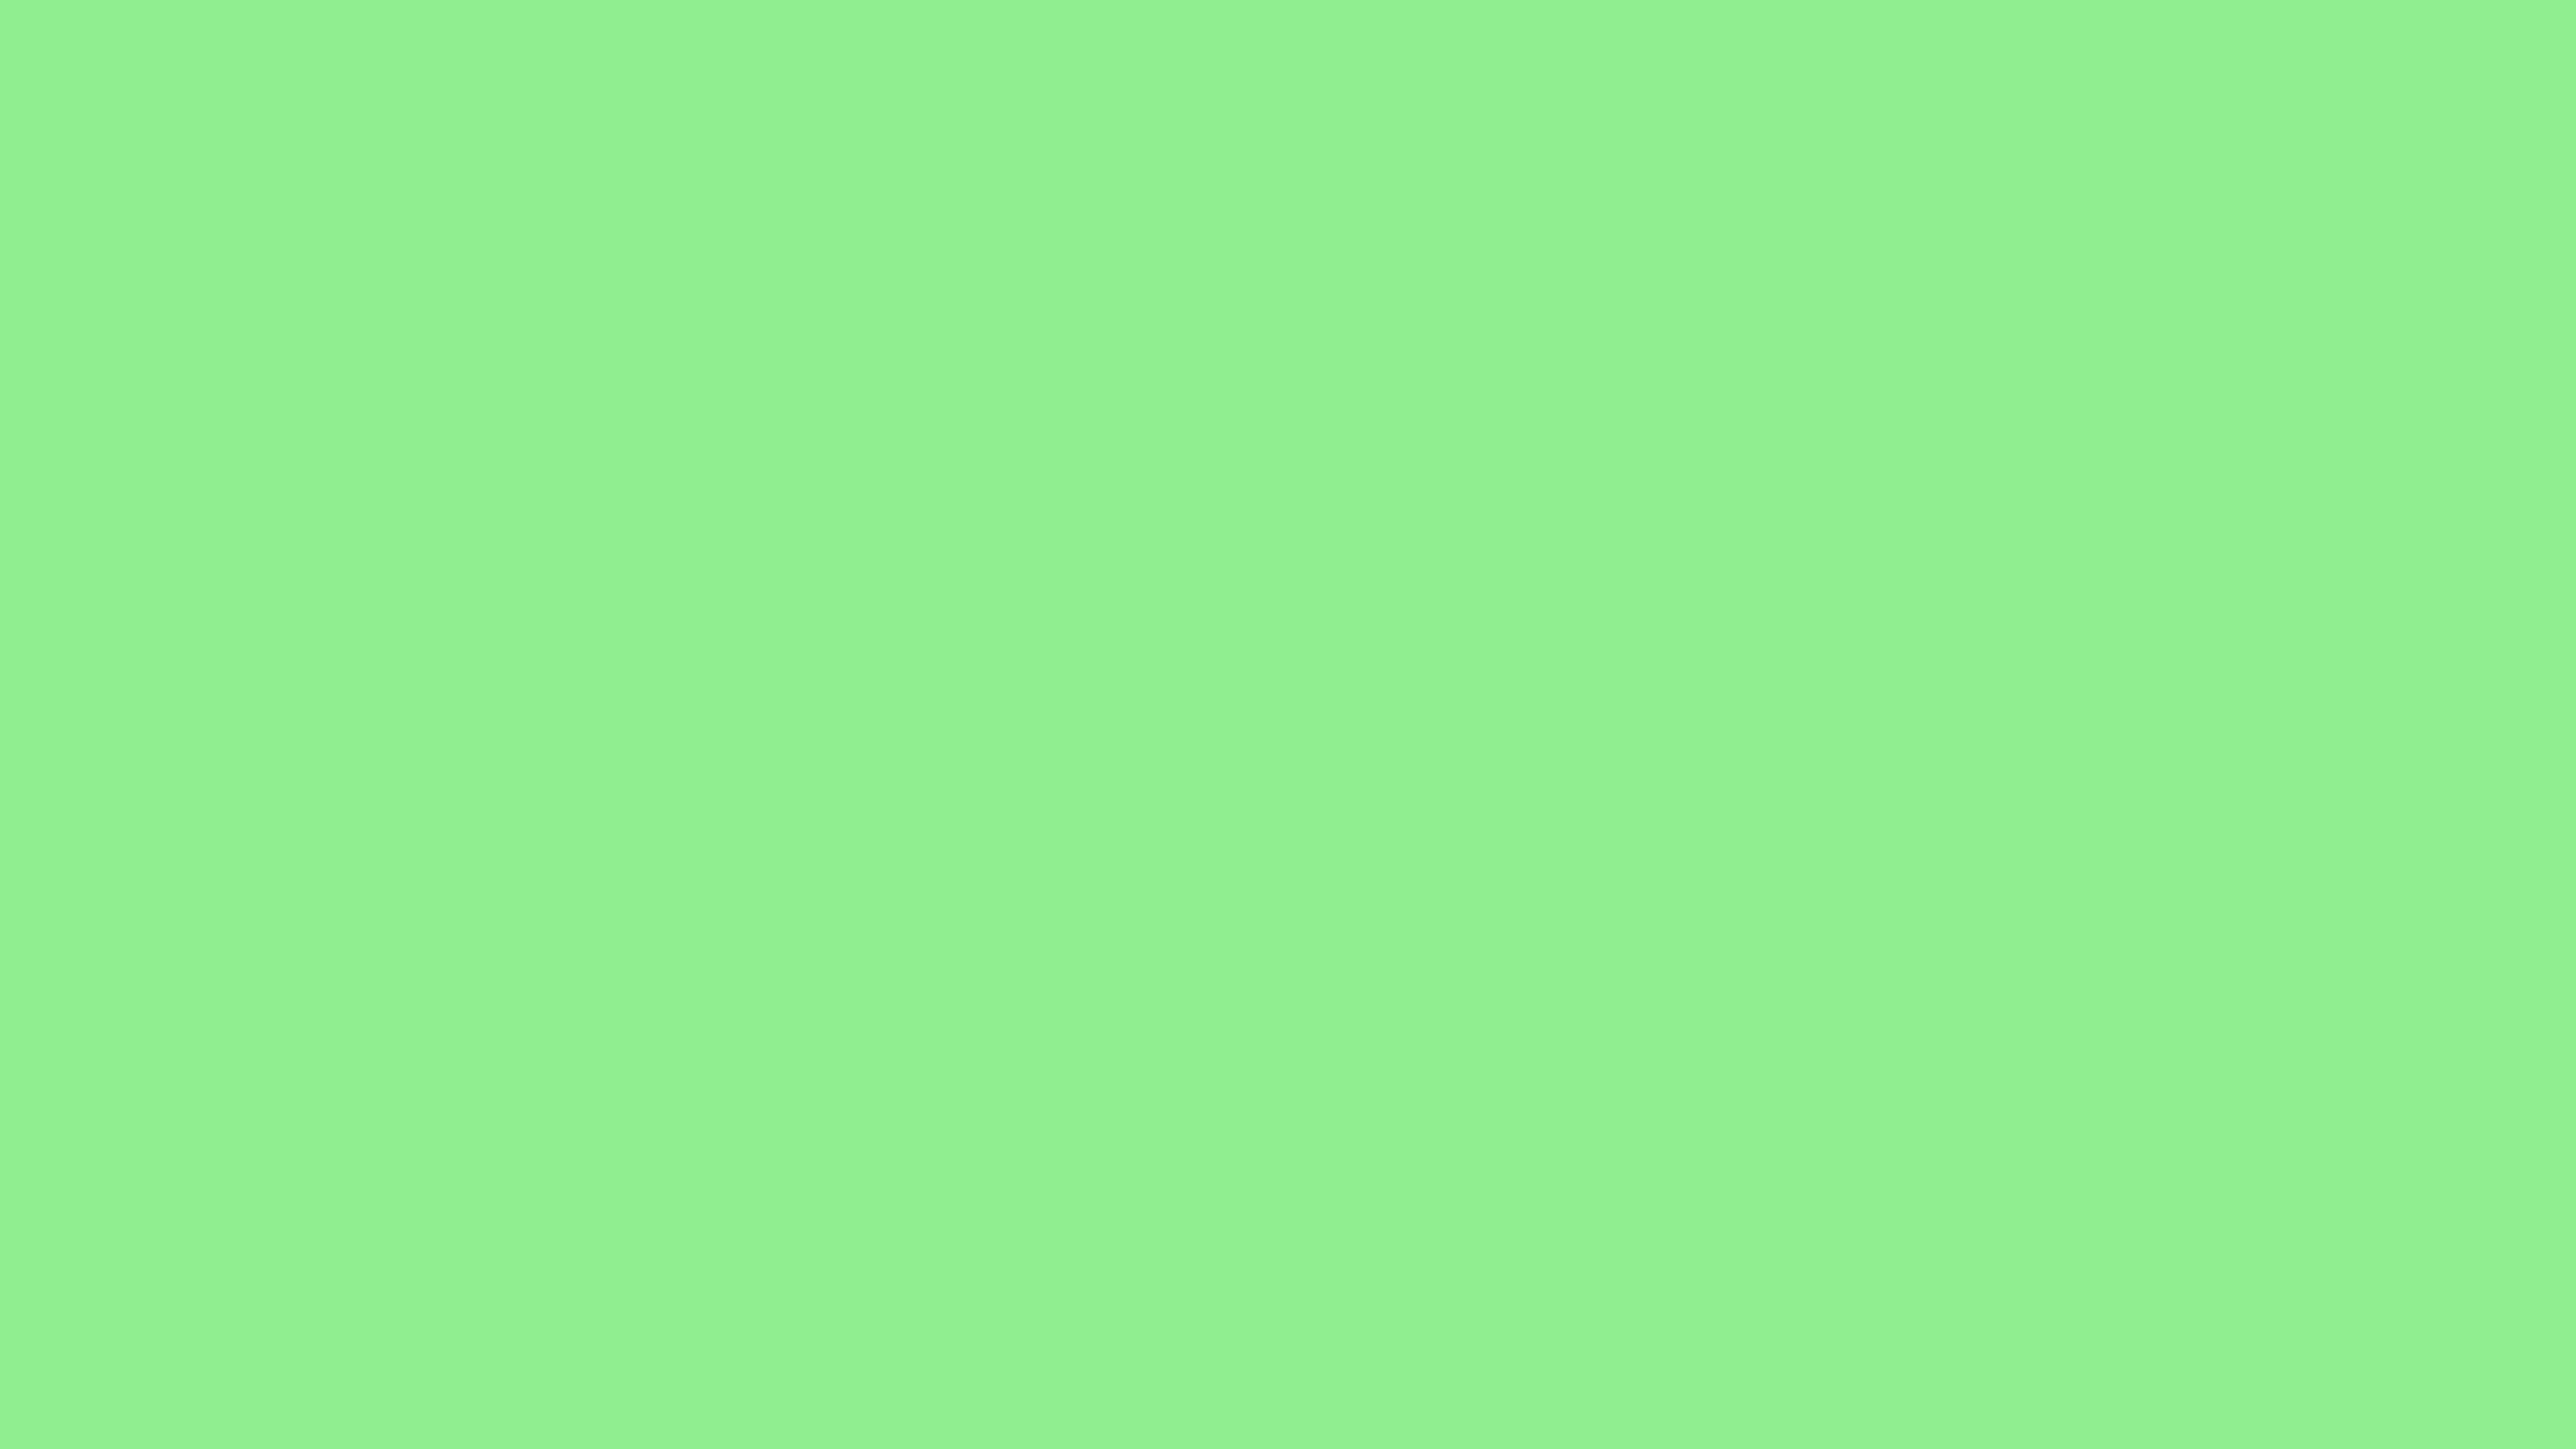 7680x4320 Light Green Solid Color Background